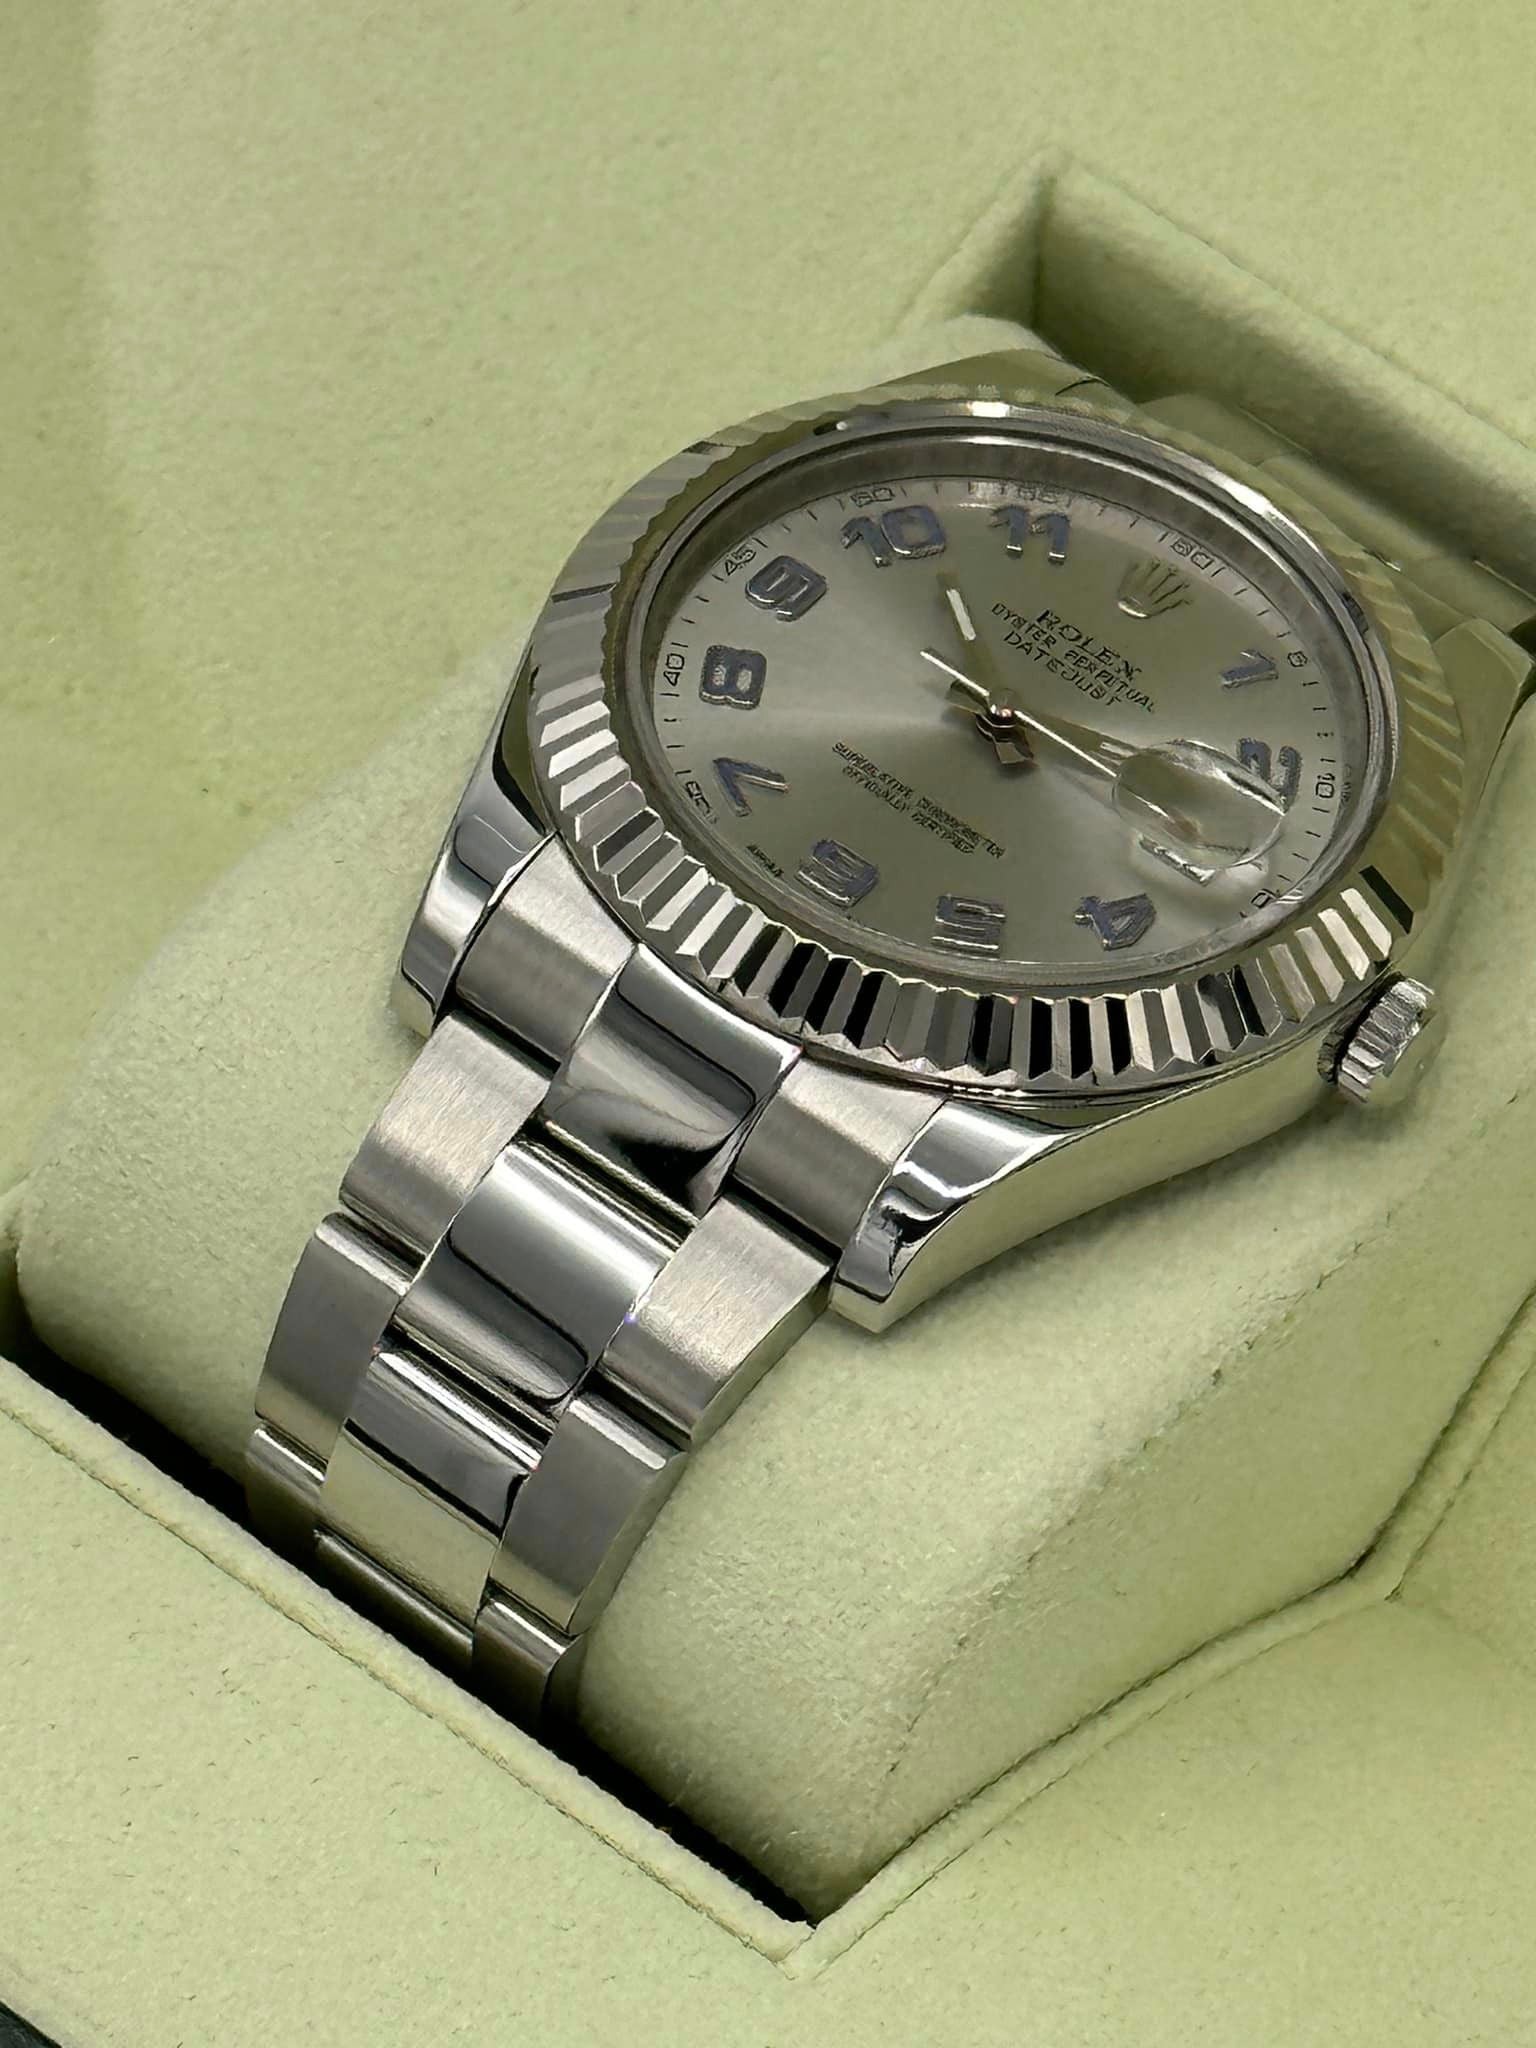 2012 Rolex Datejust II 41mm 116334 Stainless Steel Oyster Bracelet - MyWatchLLC